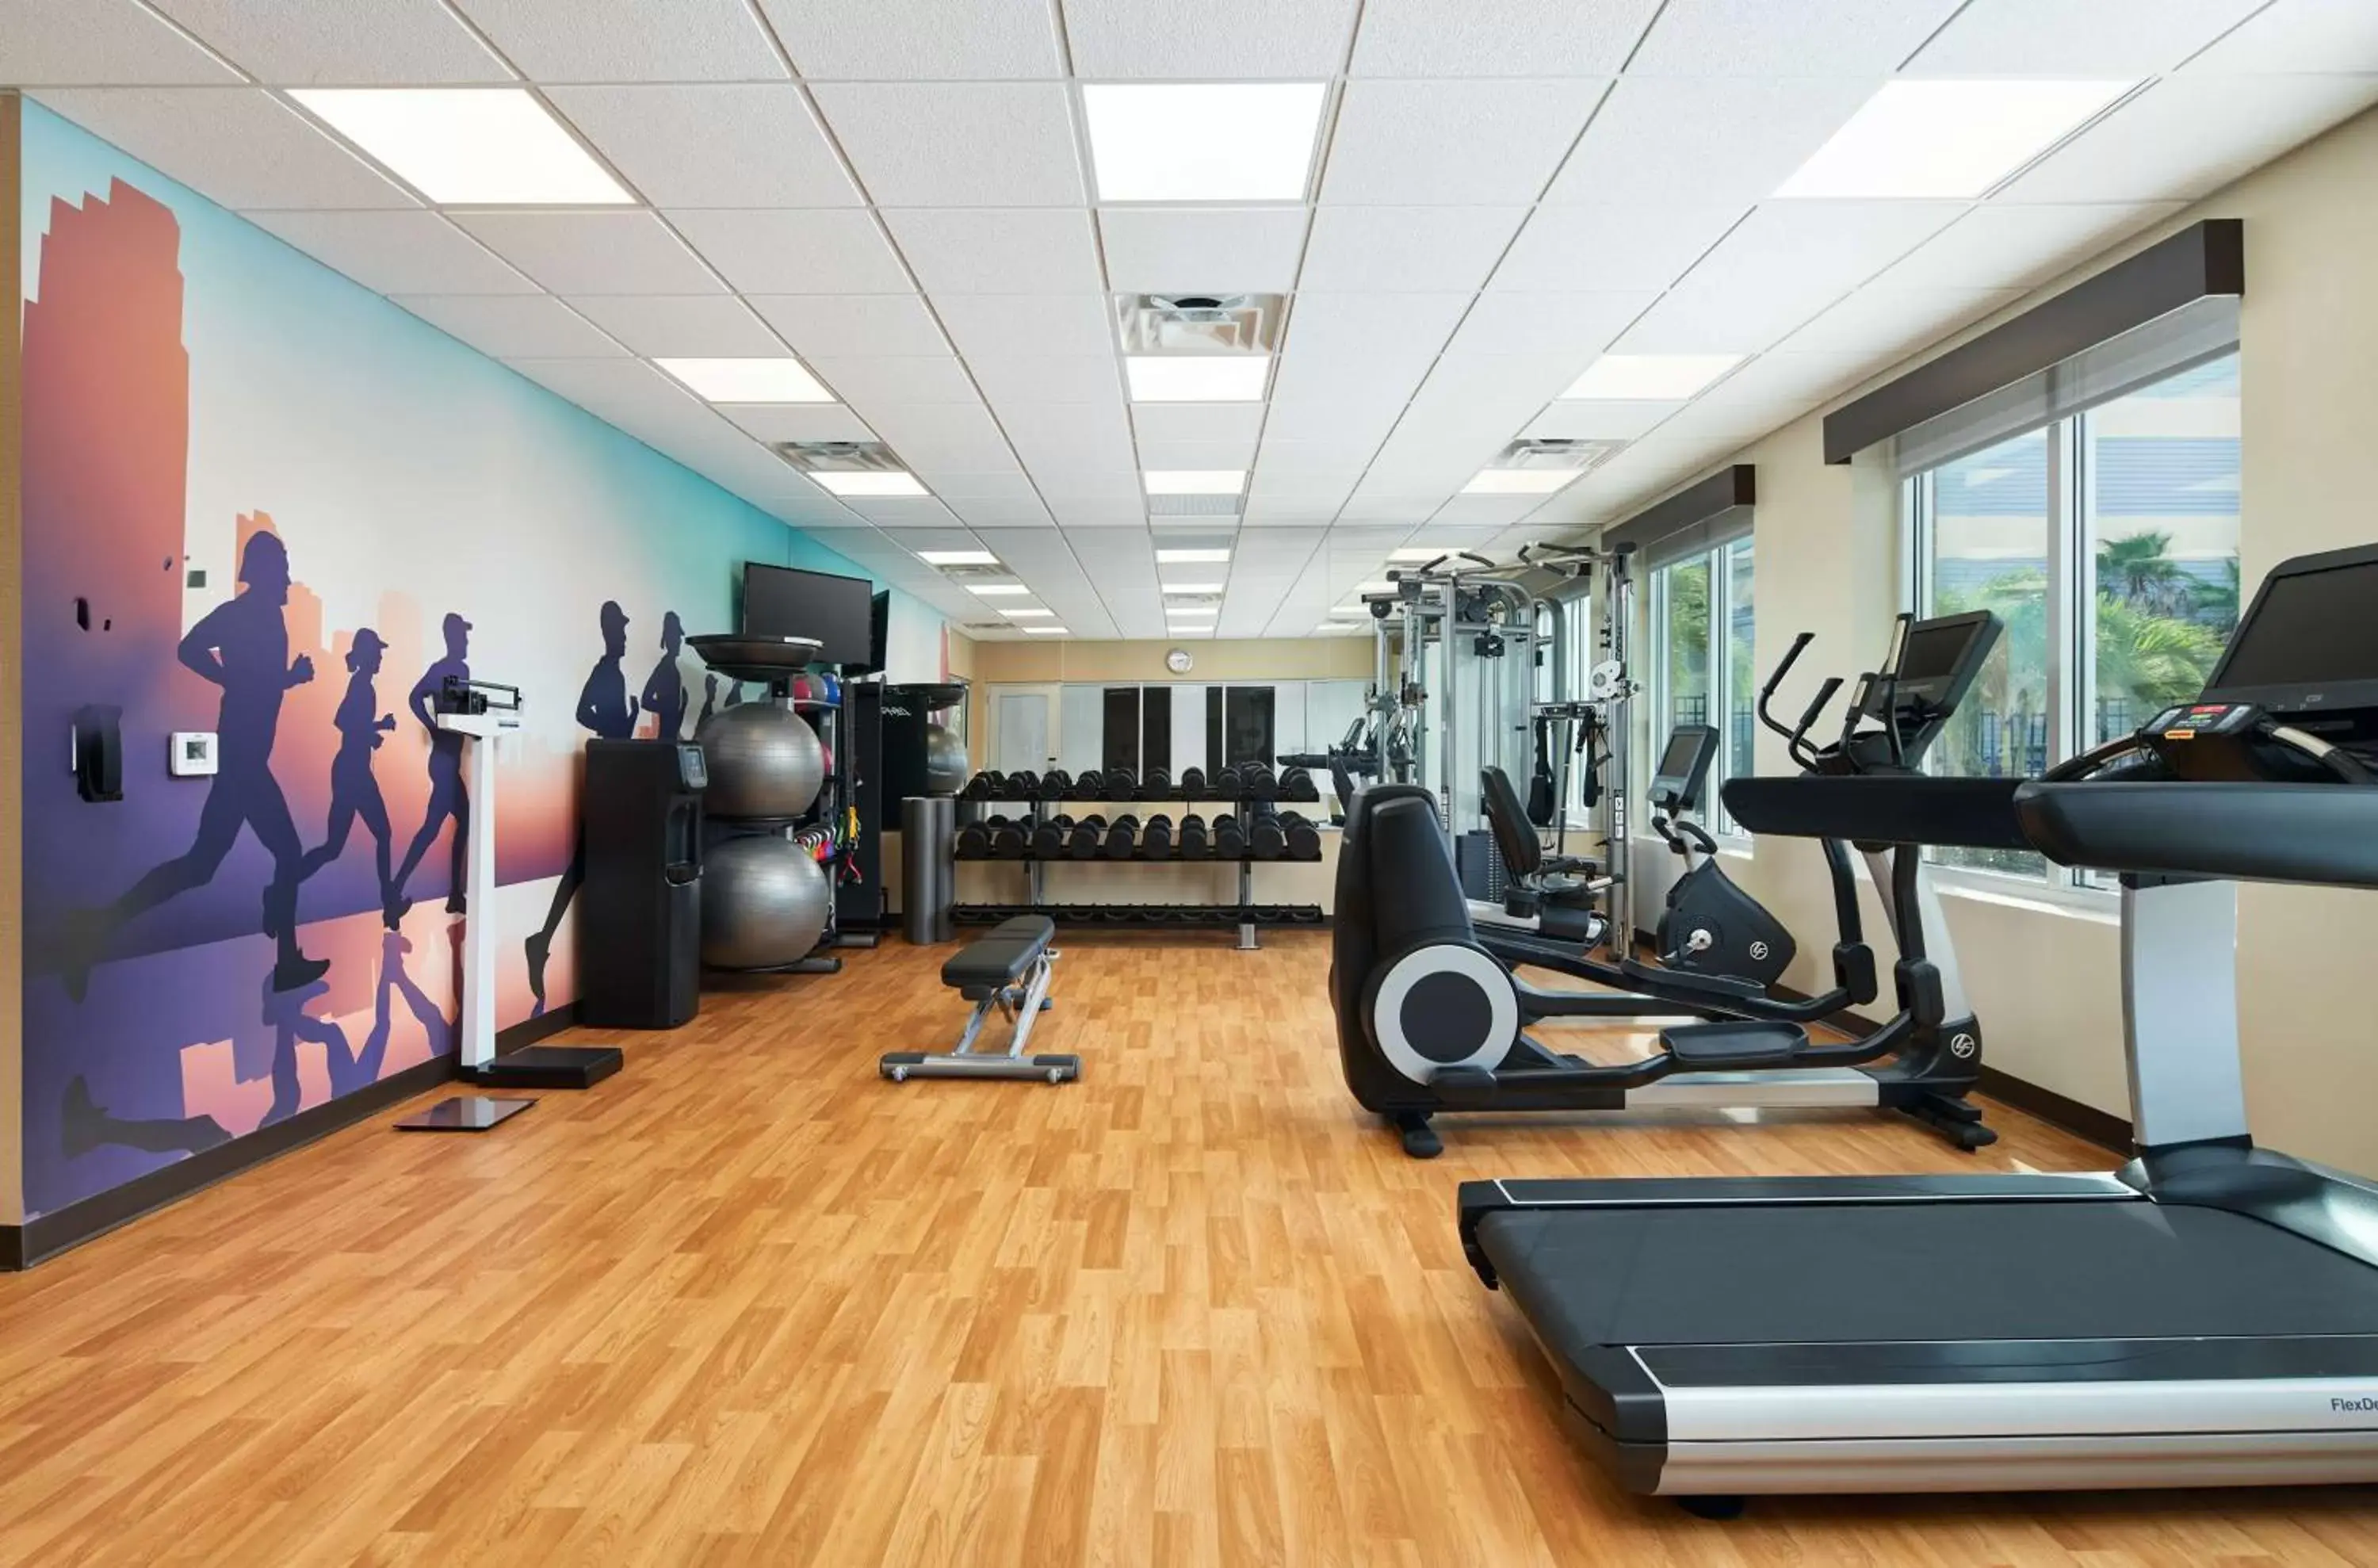 Fitness centre/facilities, Fitness Center/Facilities in Hyatt Place Melbourne/Palm Bay